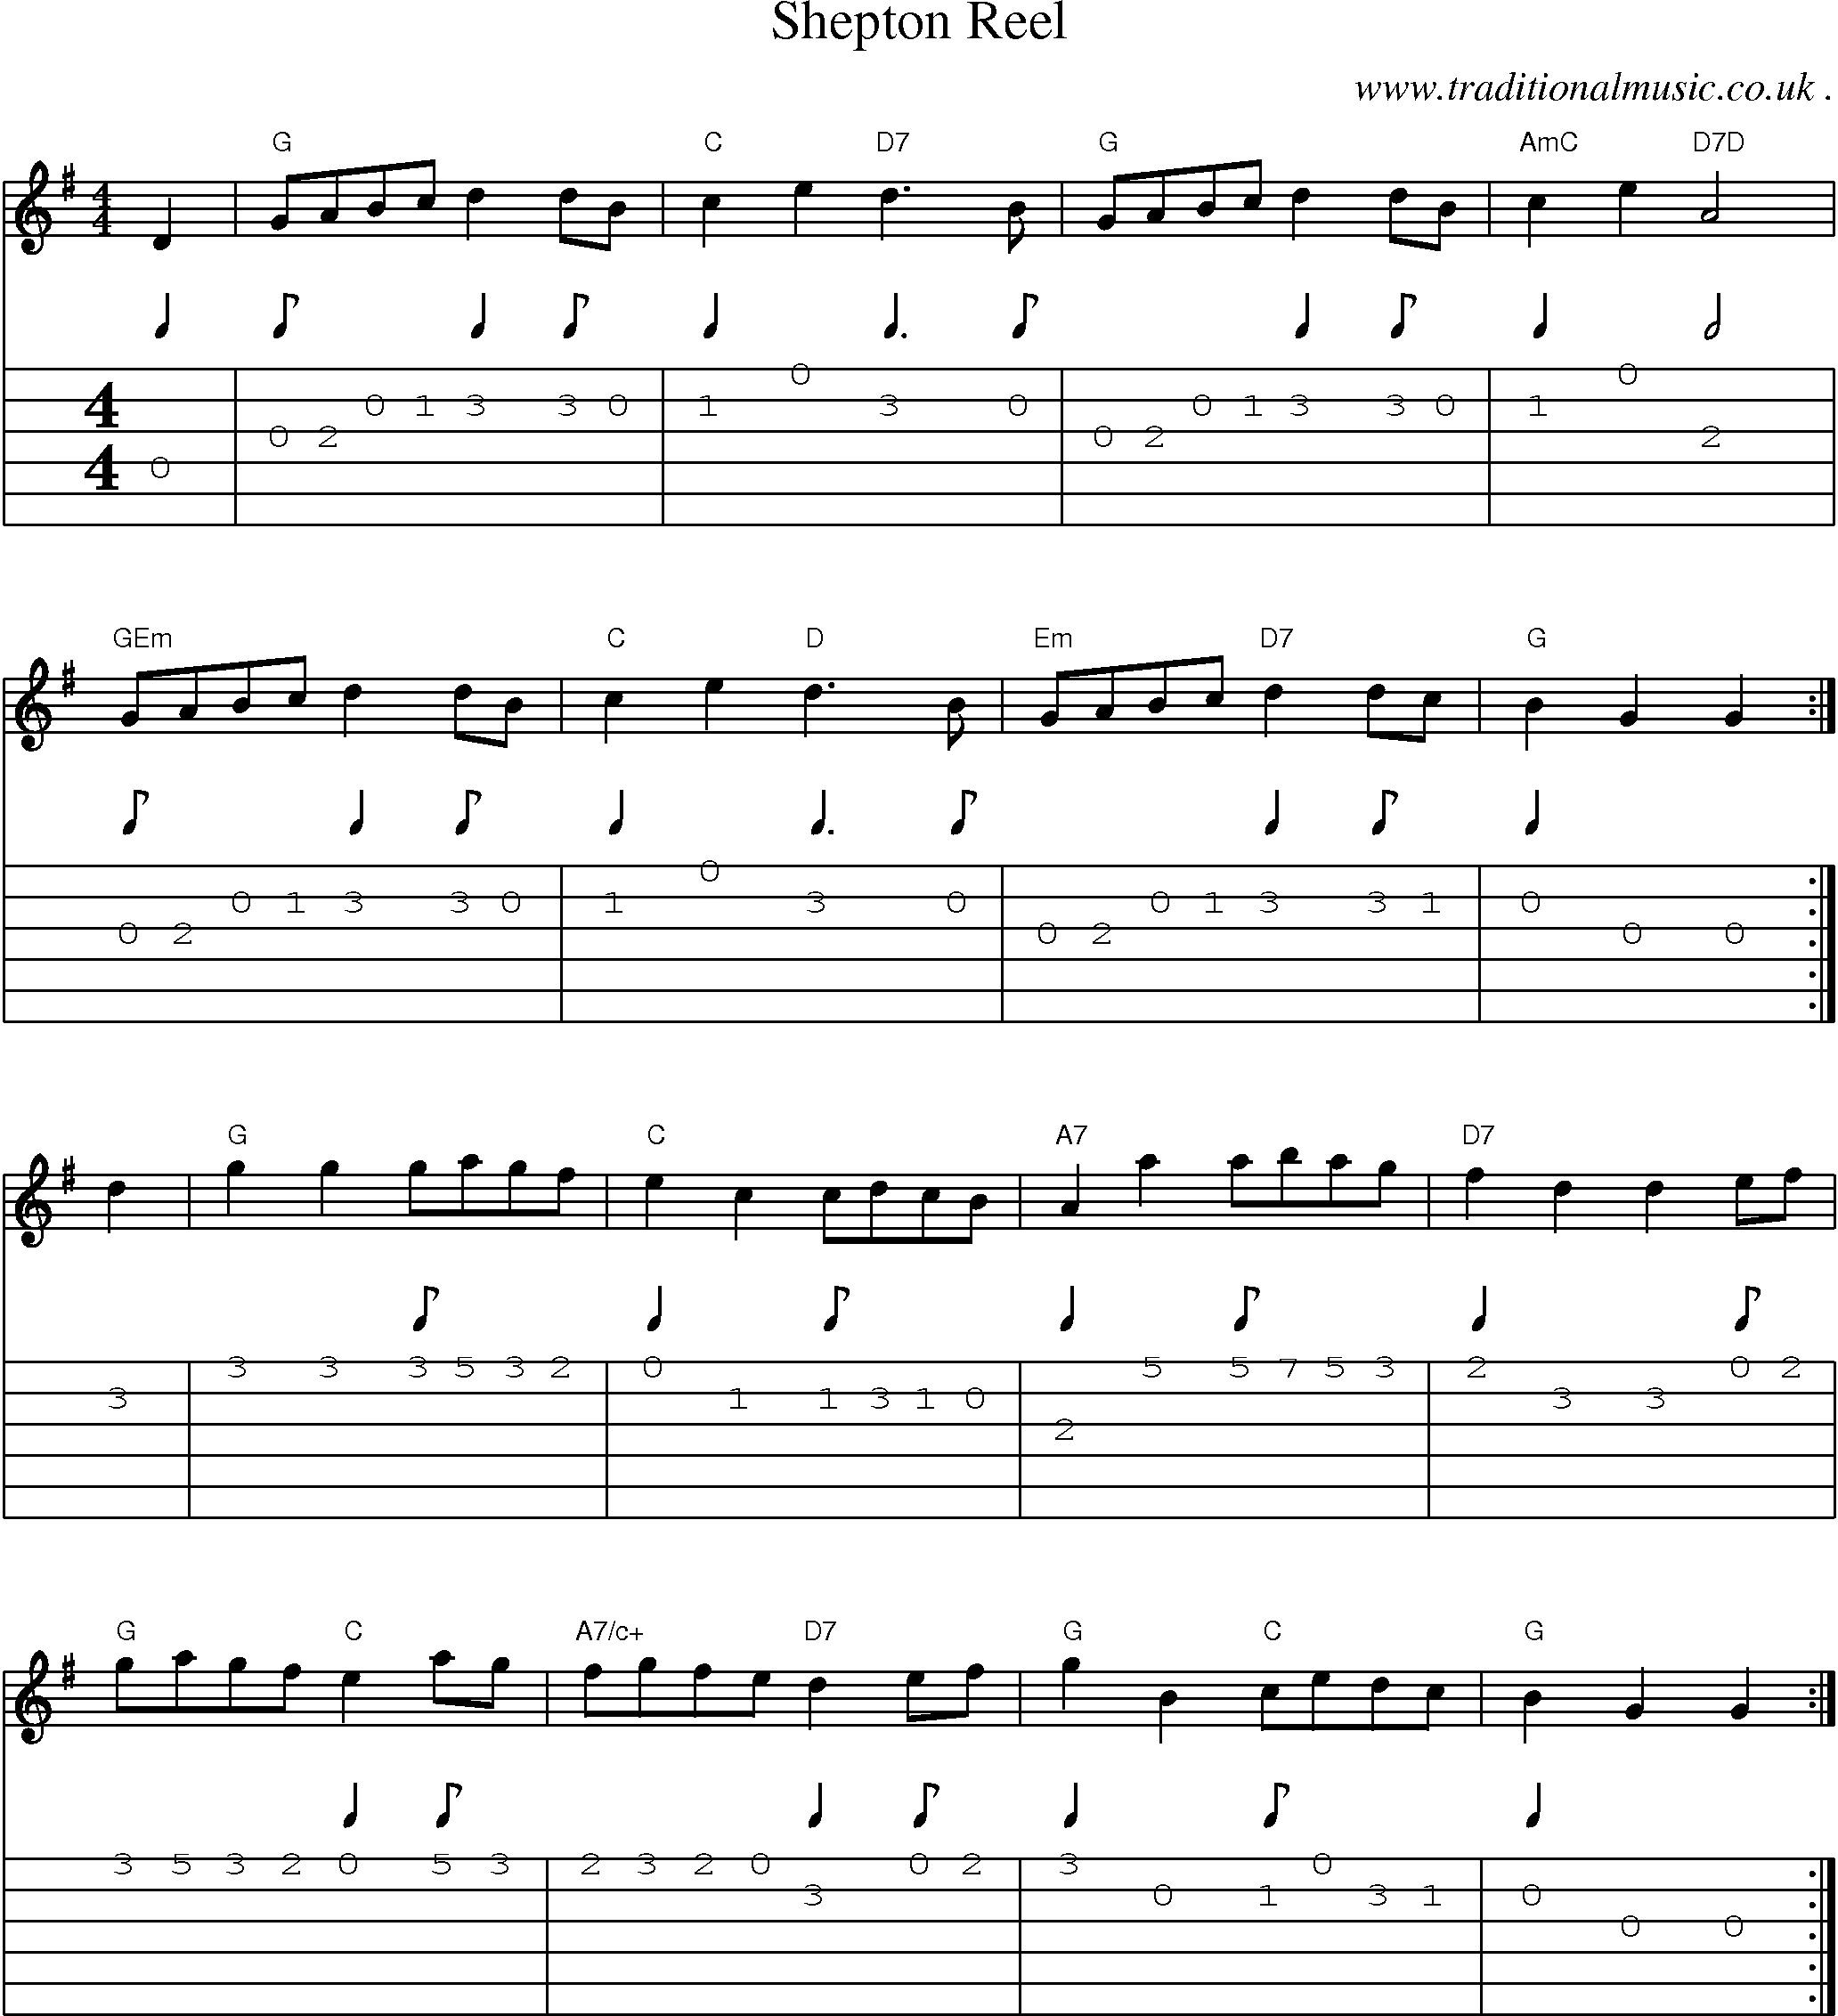 Sheet-Music and Guitar Tabs for Shepton Reel